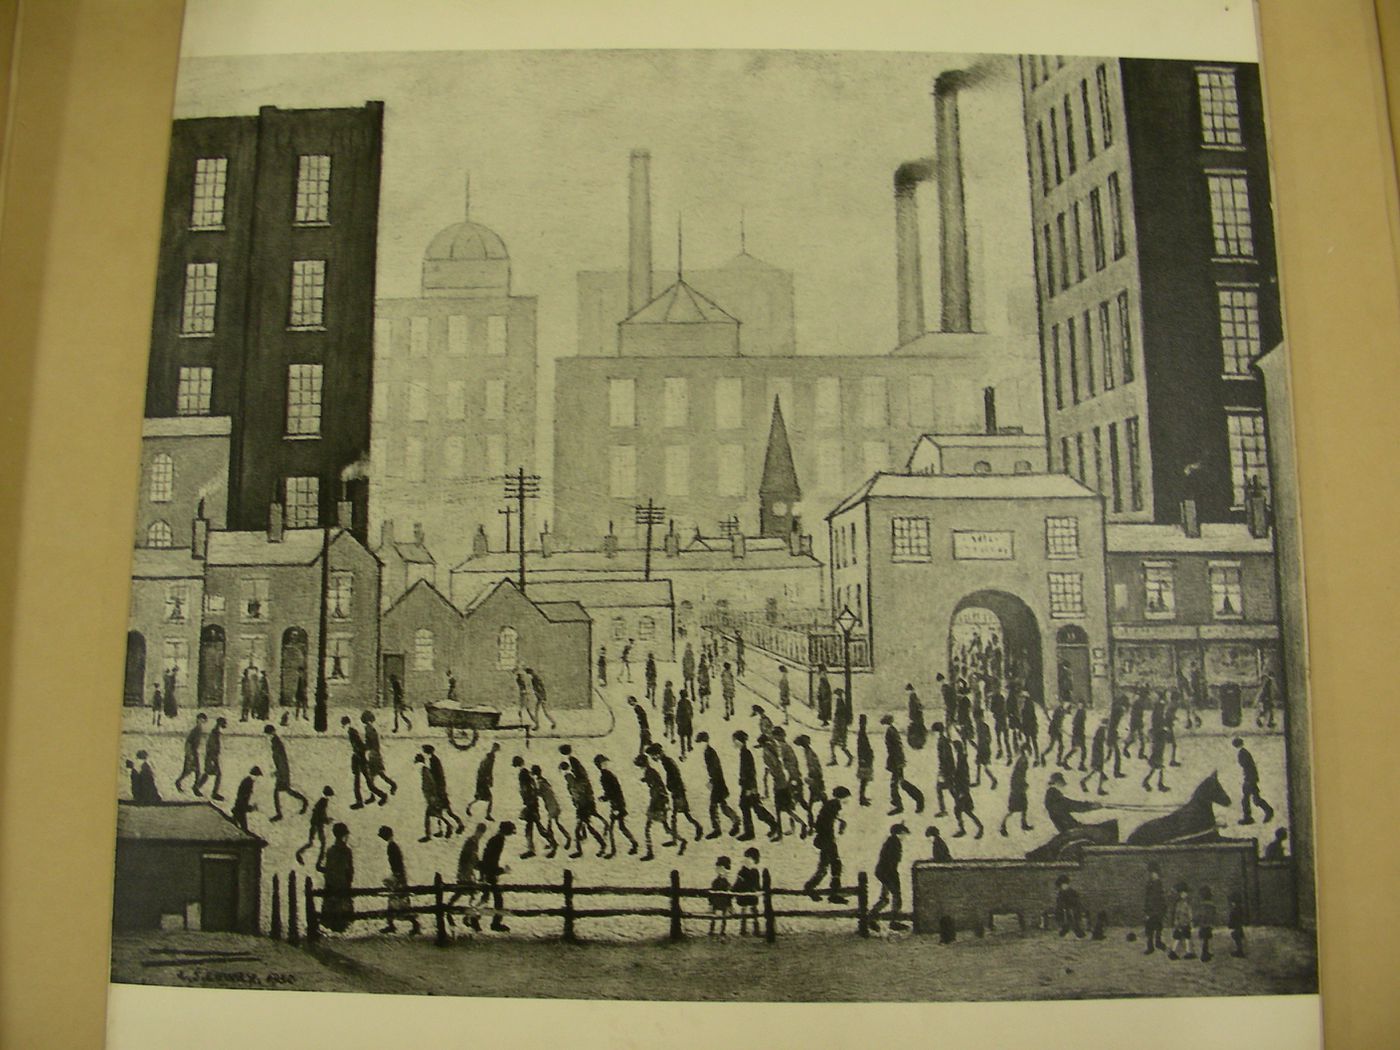 Photograph of a painting by Laurence Stephen Lowry